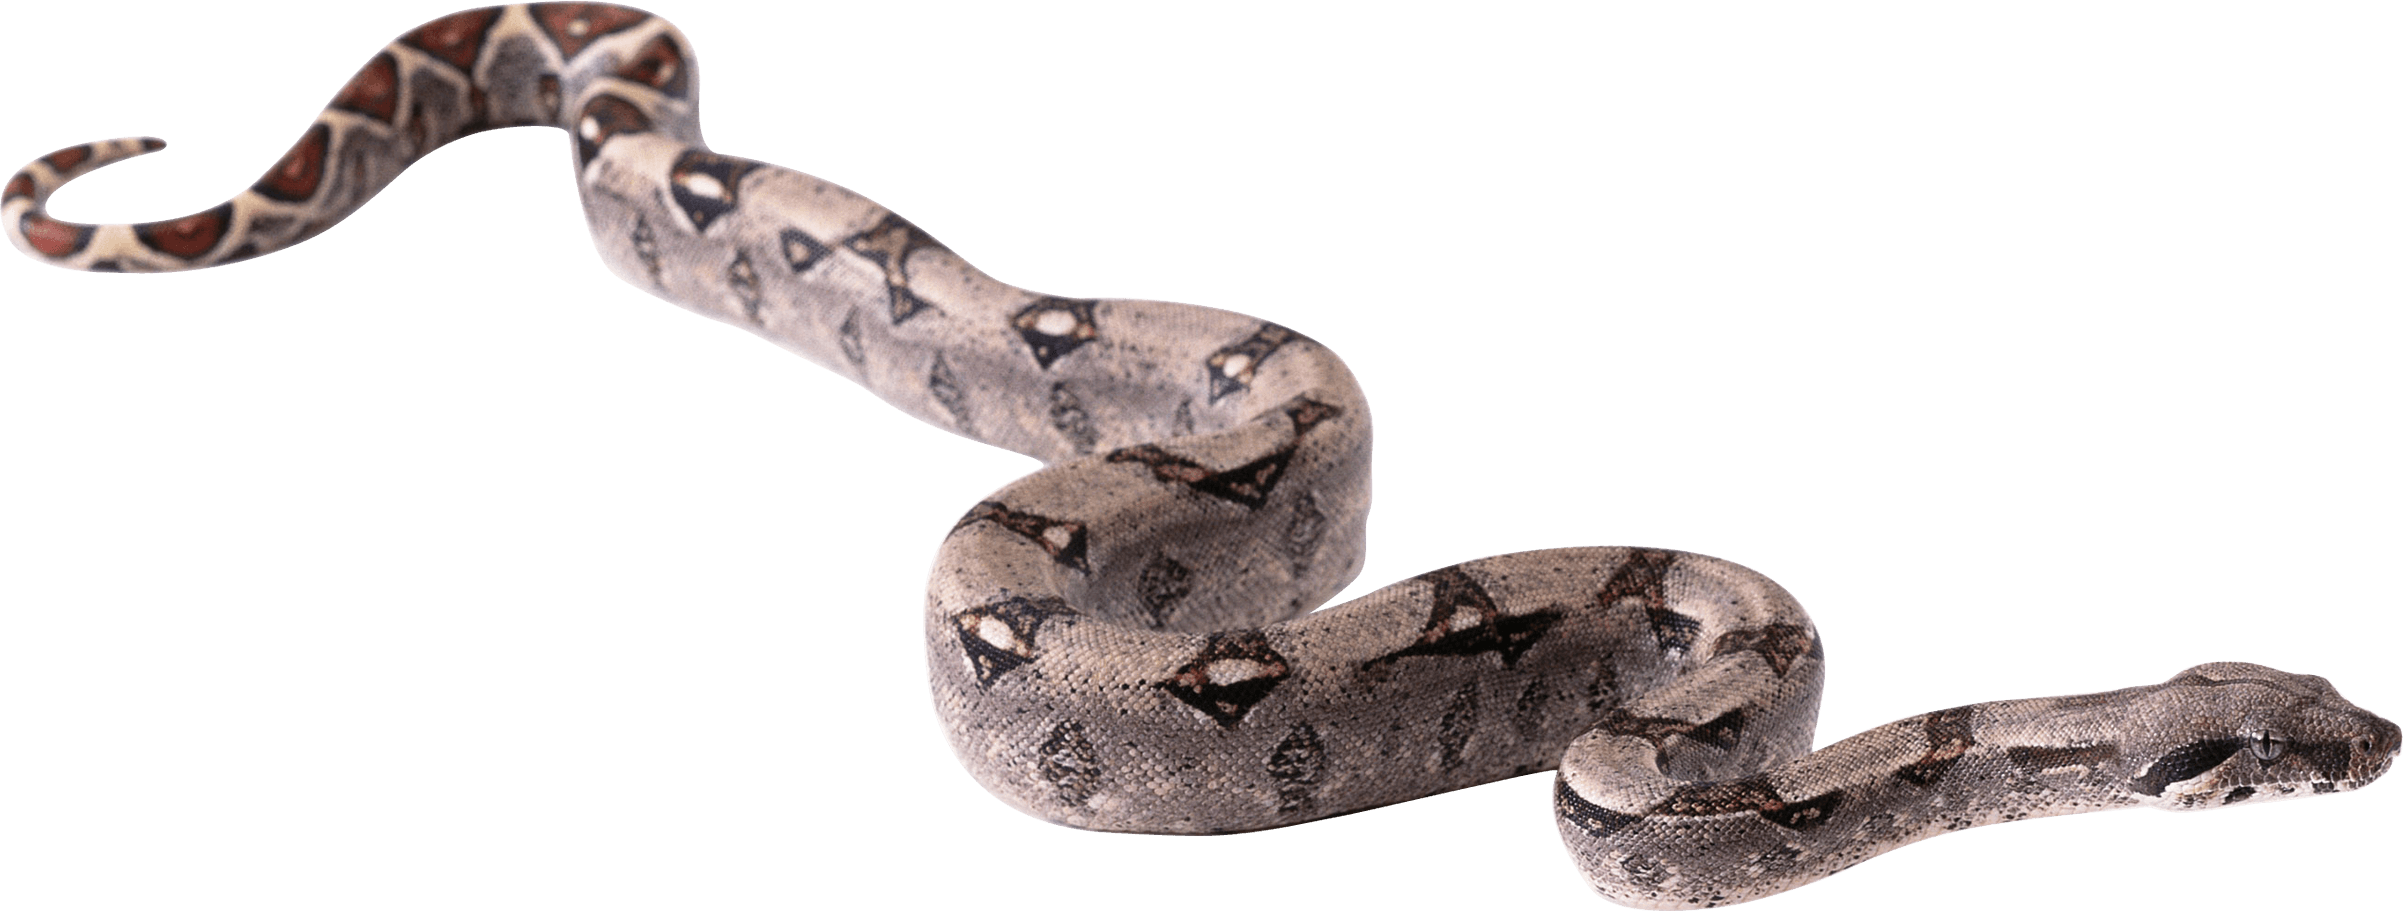 Clipart snake realistic. Python long free collection